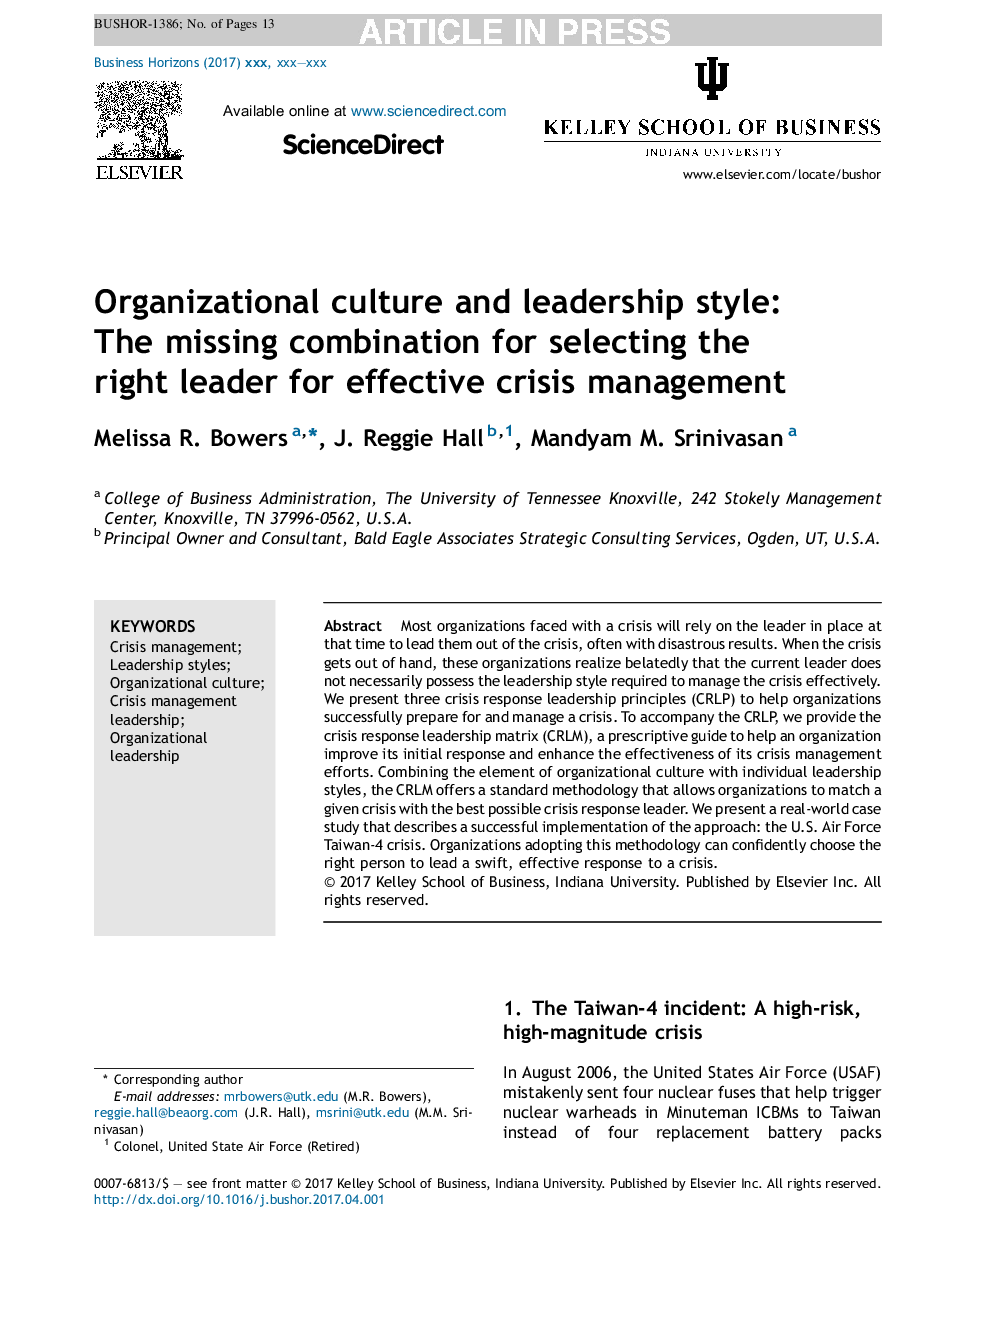 Organizational culture and leadership style: The missing combination for selecting the right leader for effective crisis management